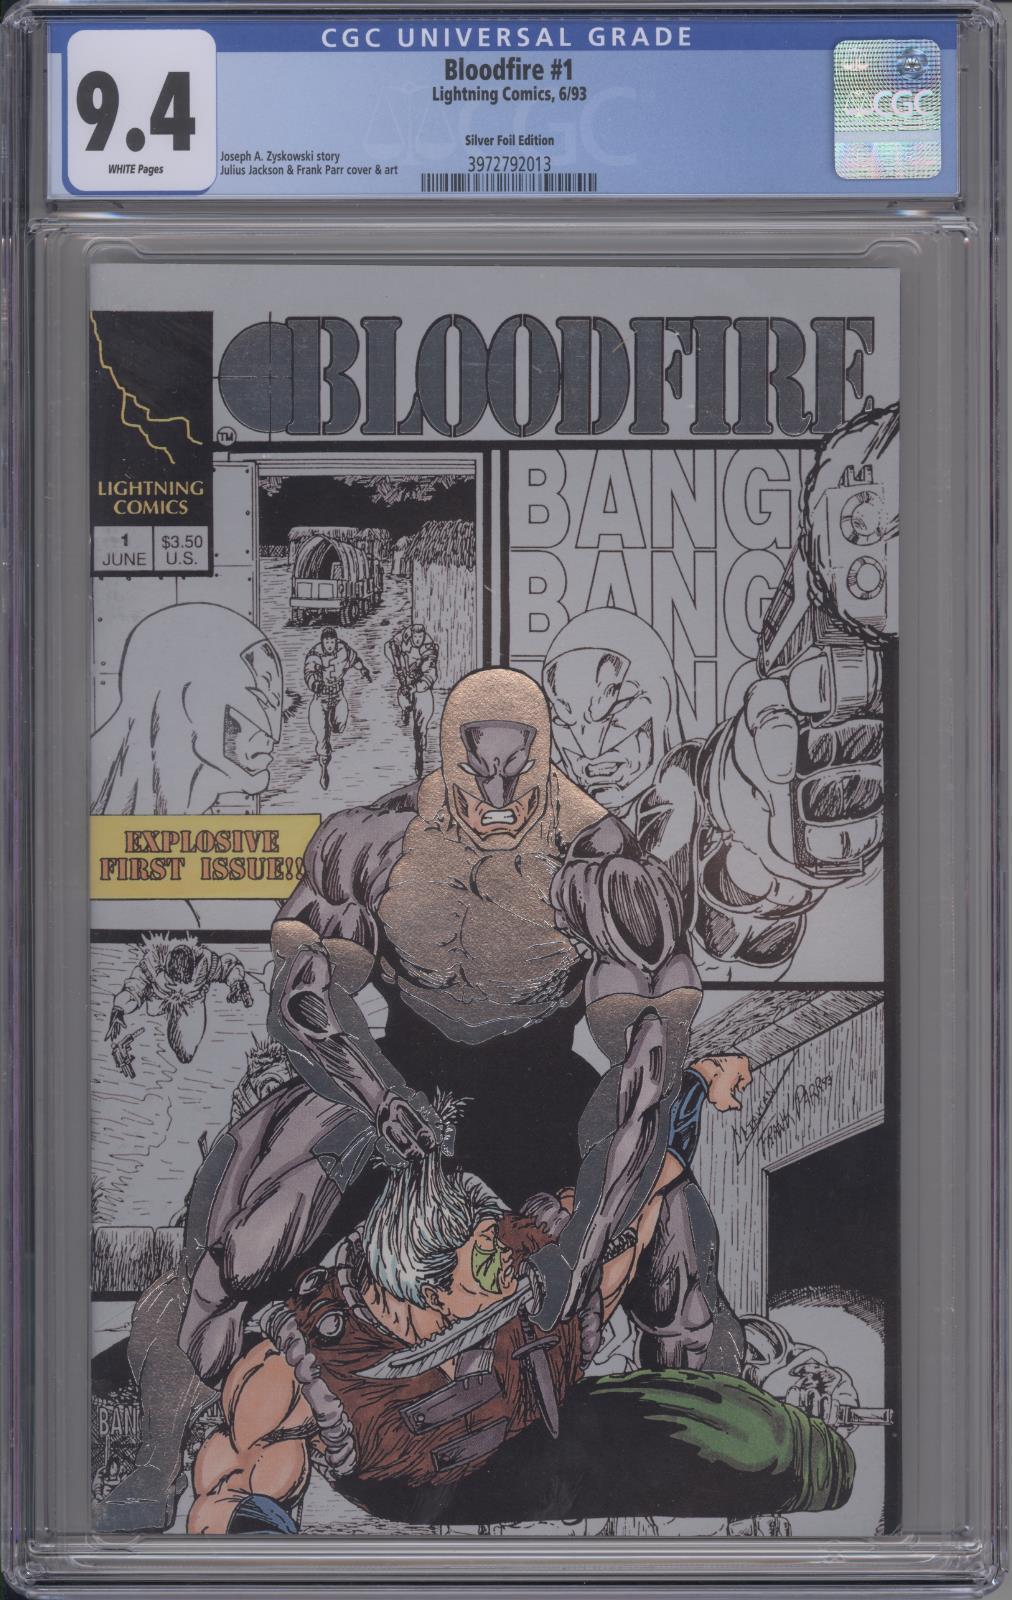 BLOODFIRE #1 - CGC 9.4 - SILVER FOIL VARIANT - RARE GRADED COPY